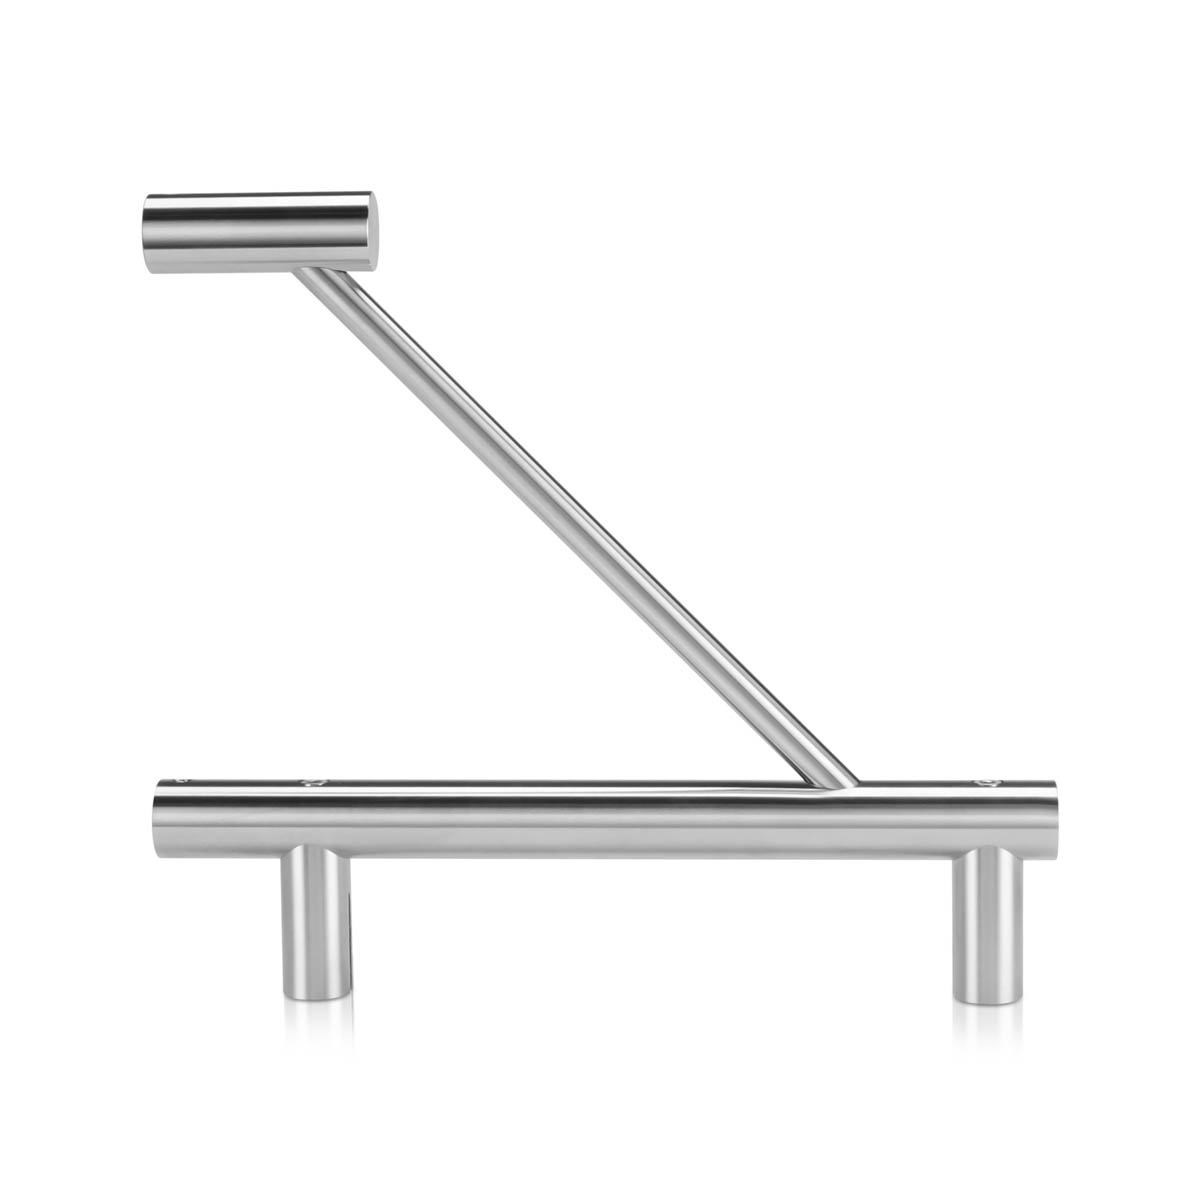 Aluminum Flag Sign Bracket Only, Stainless Steel Satin Brushed Finish. 1/4'' Thickness Material Accepted, 7-7/8 Length, 3/4'' Diameter. (Sold Without Panel, Bracket Only)